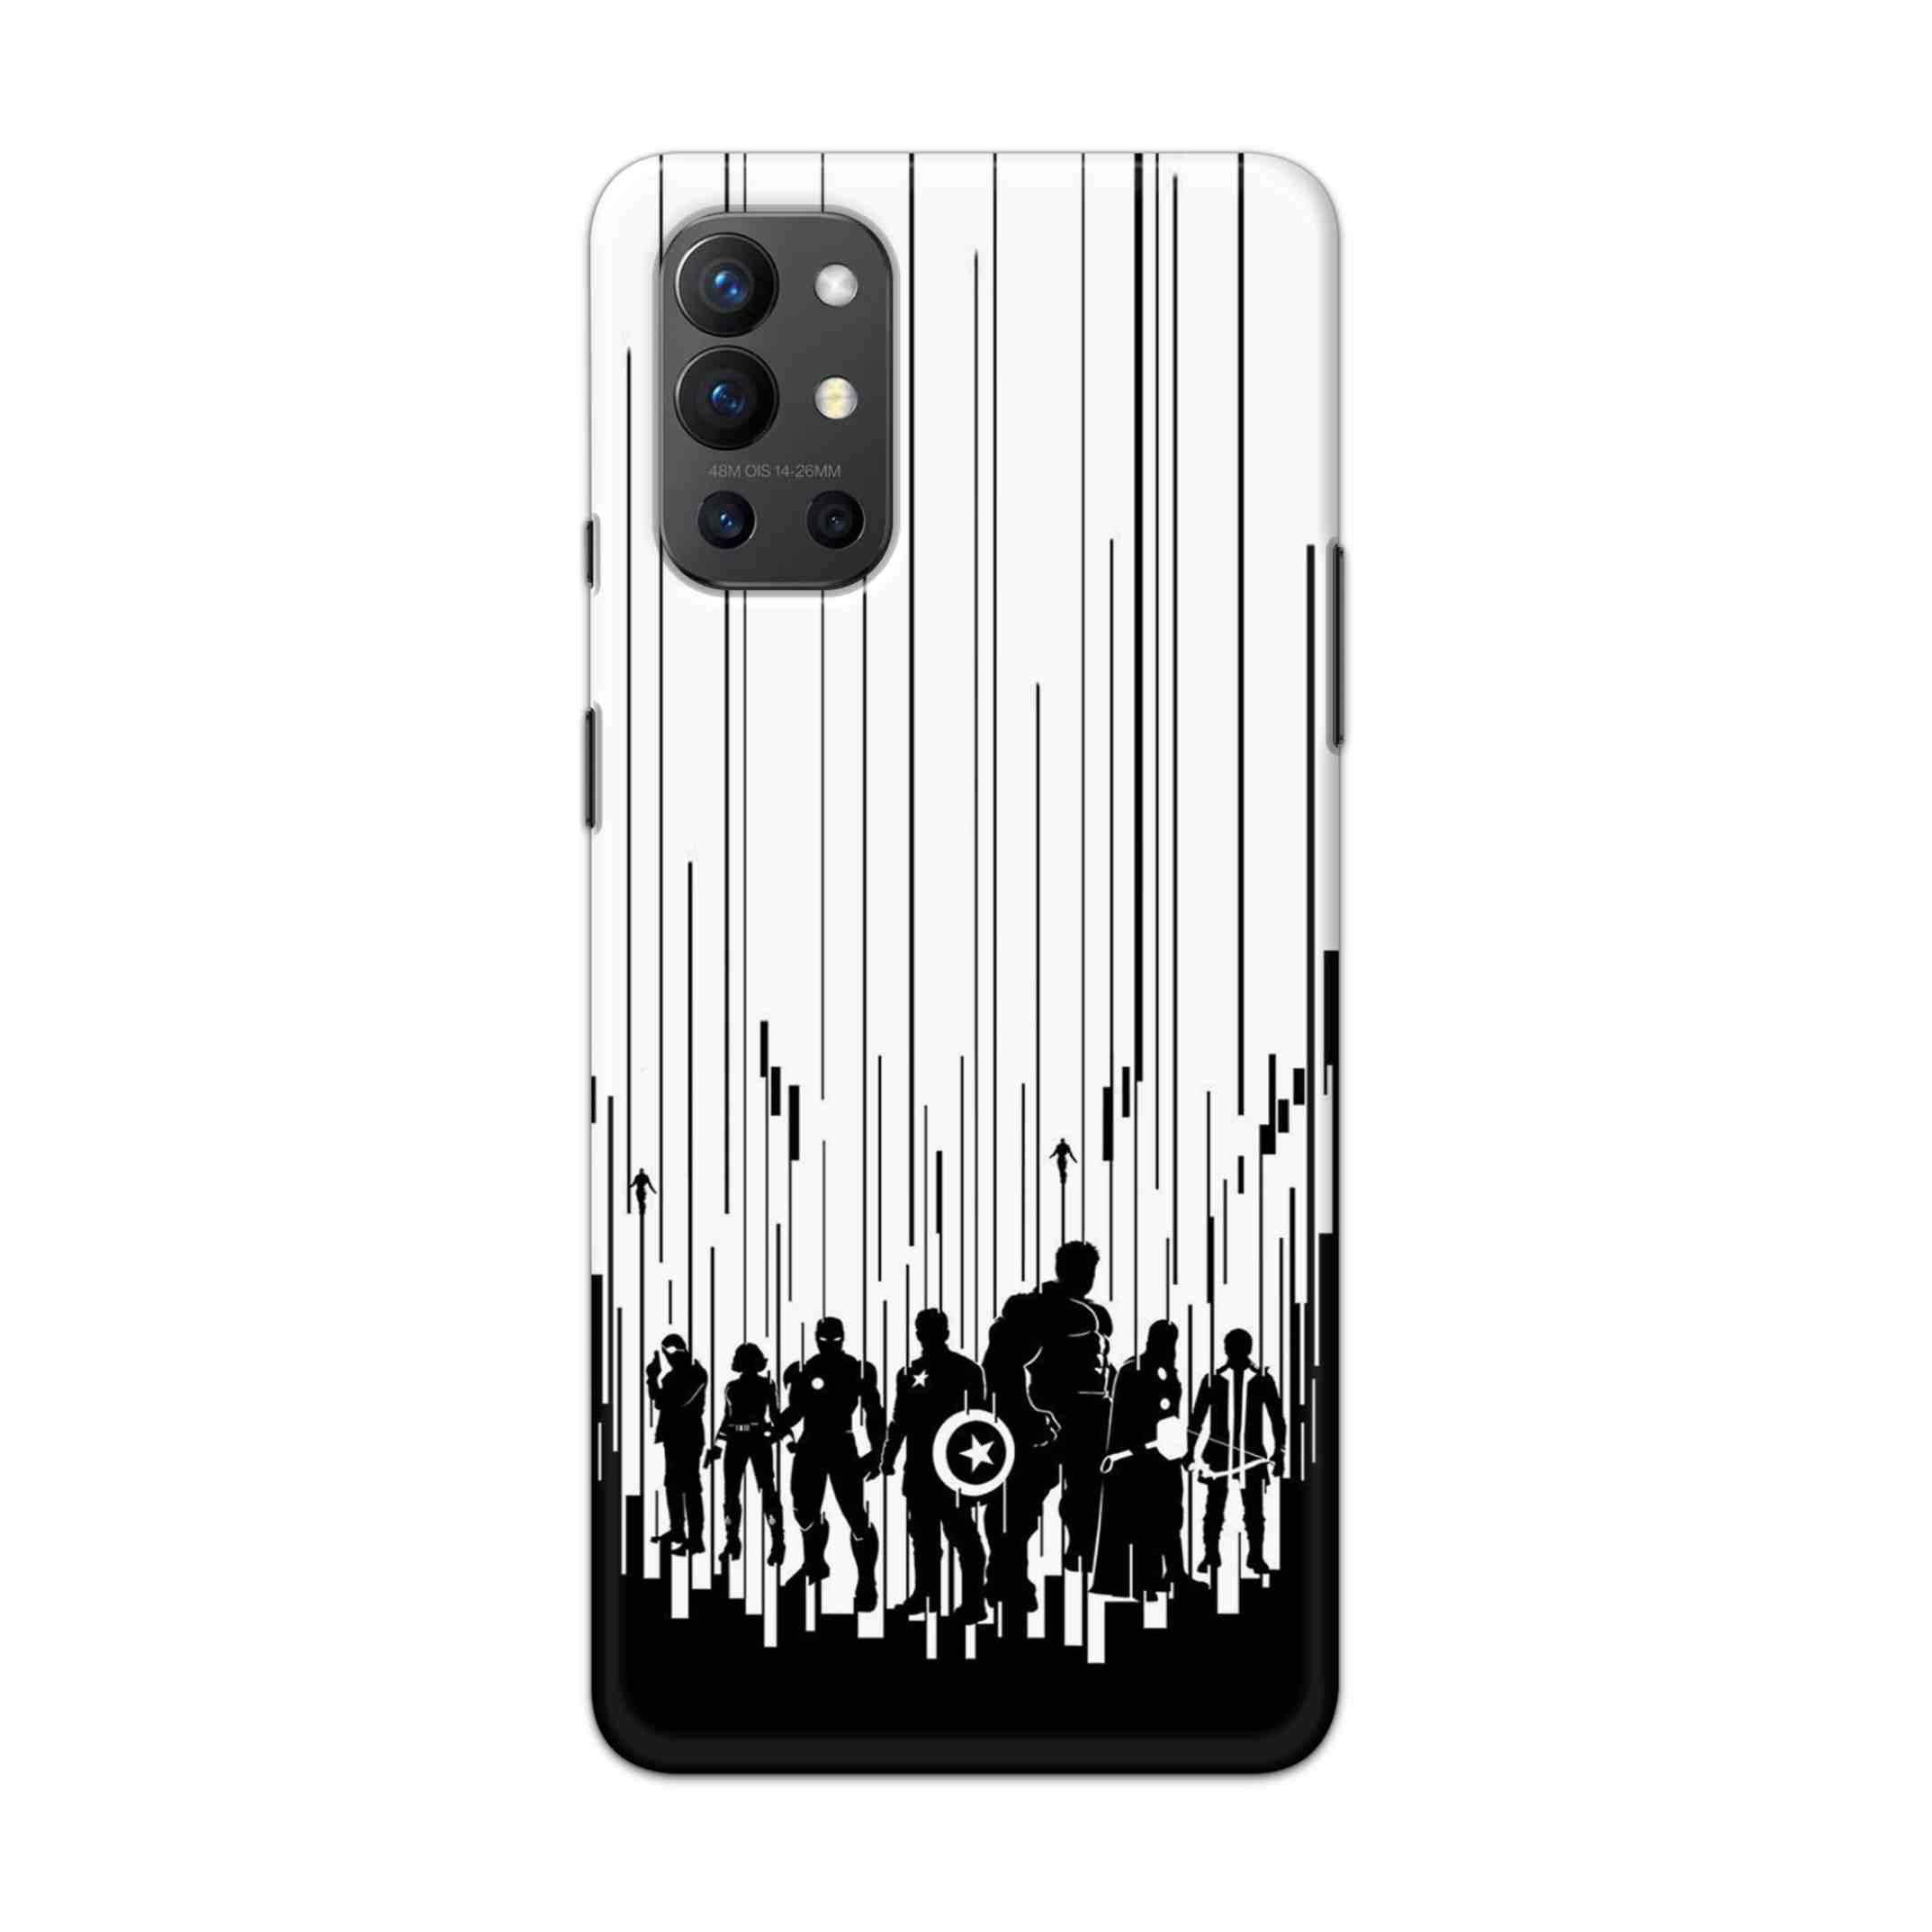 Buy Black And White Avengers Hard Back Mobile Phone Case Cover For OnePlus 9R / 8T Online